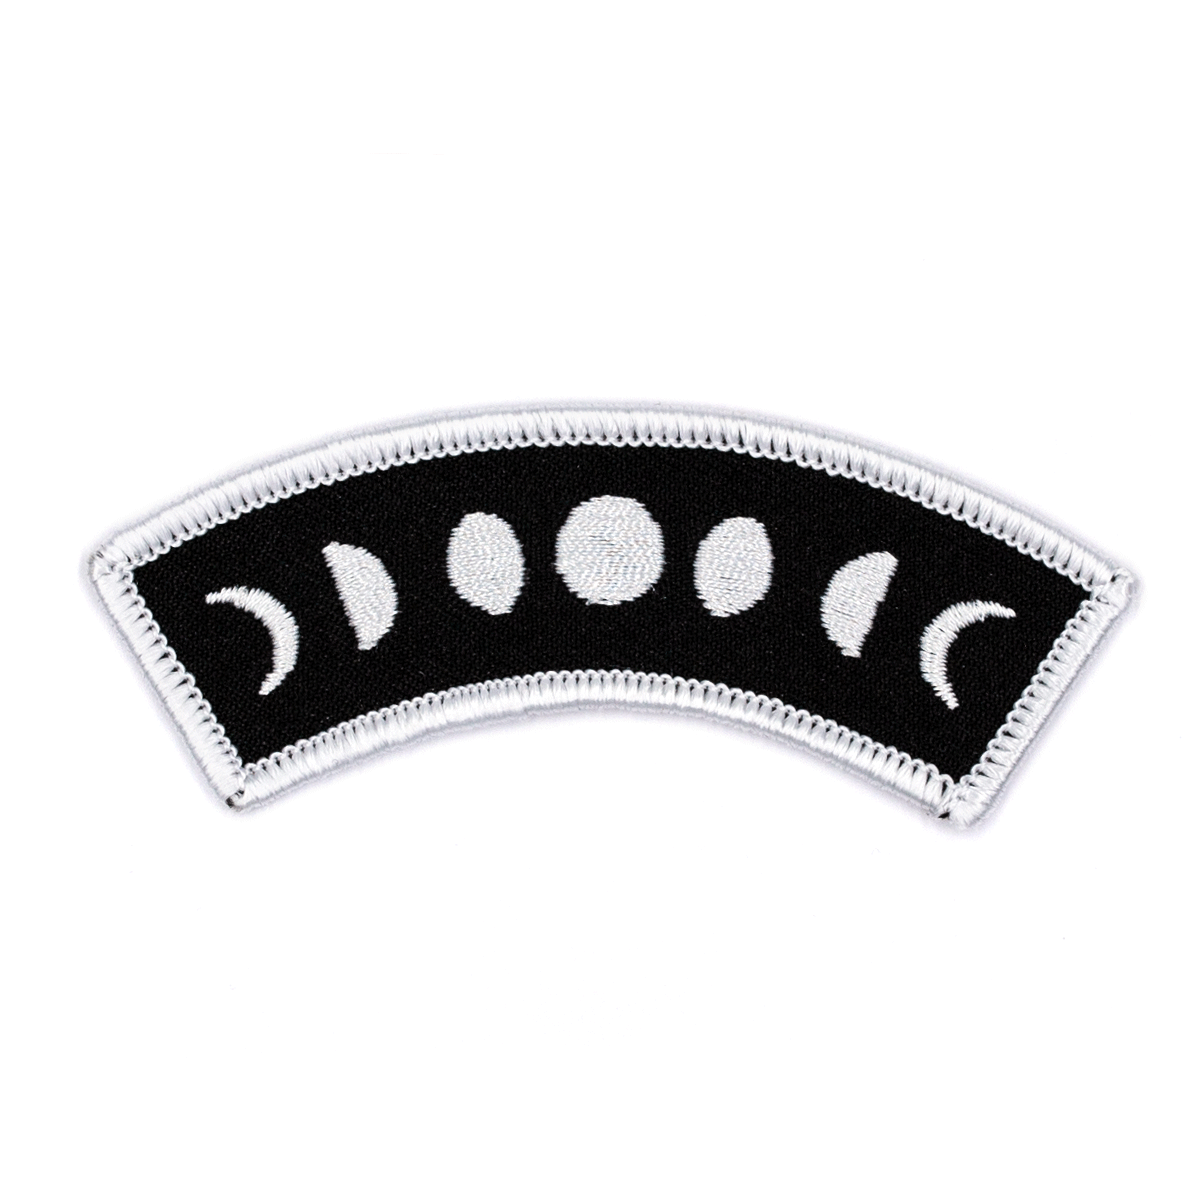 Moon Phases Embroidered Iron-On Patch - Spiral Circle